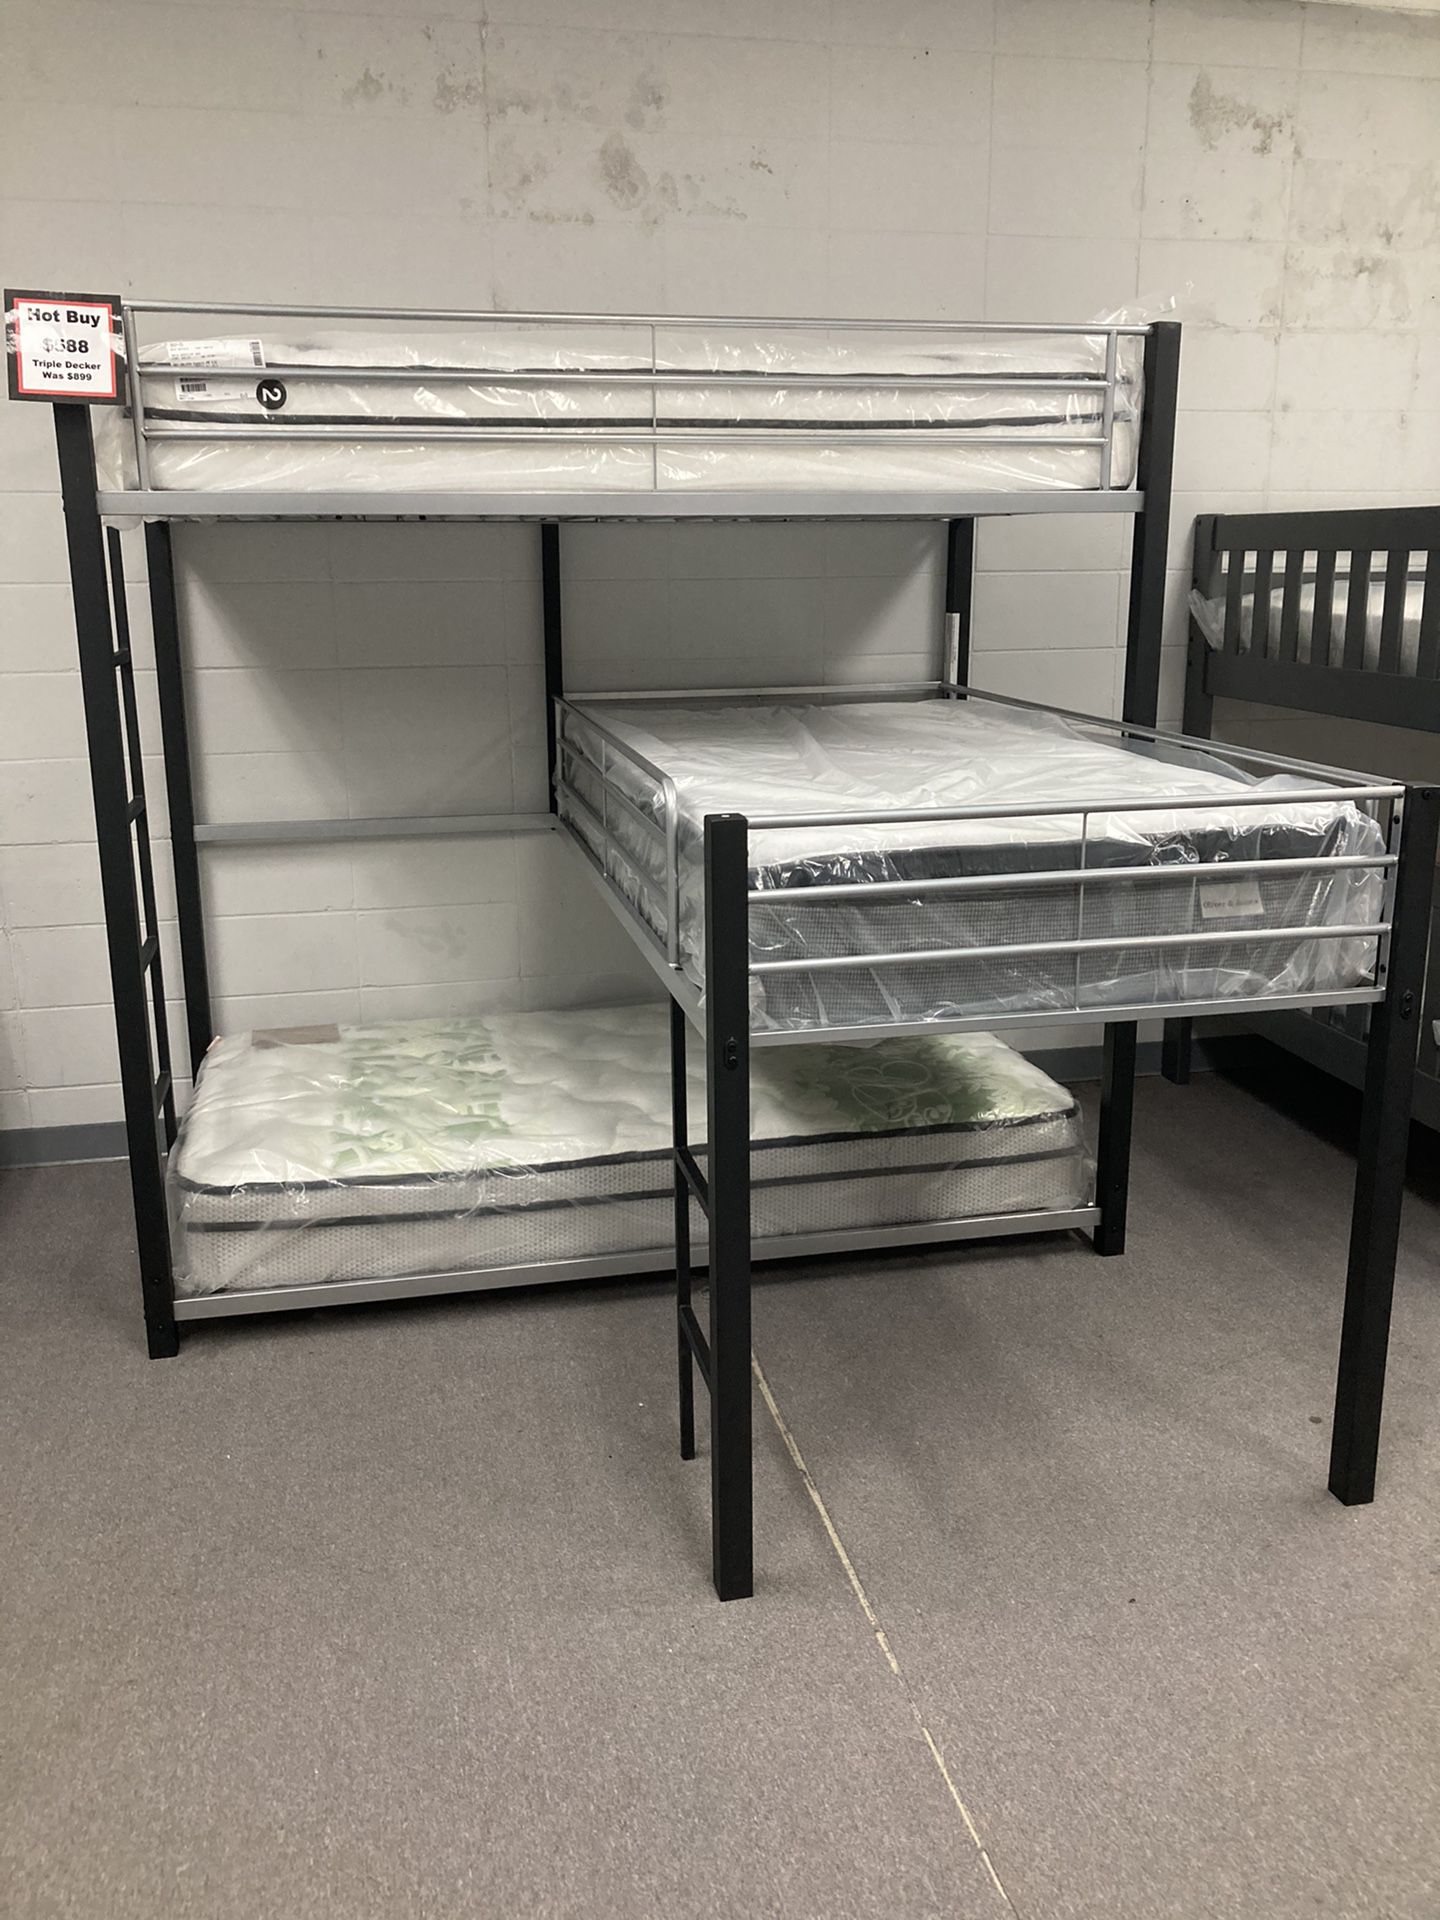 Brand New Kids Bunk Beds In Stock!! Low As $39 Down !!